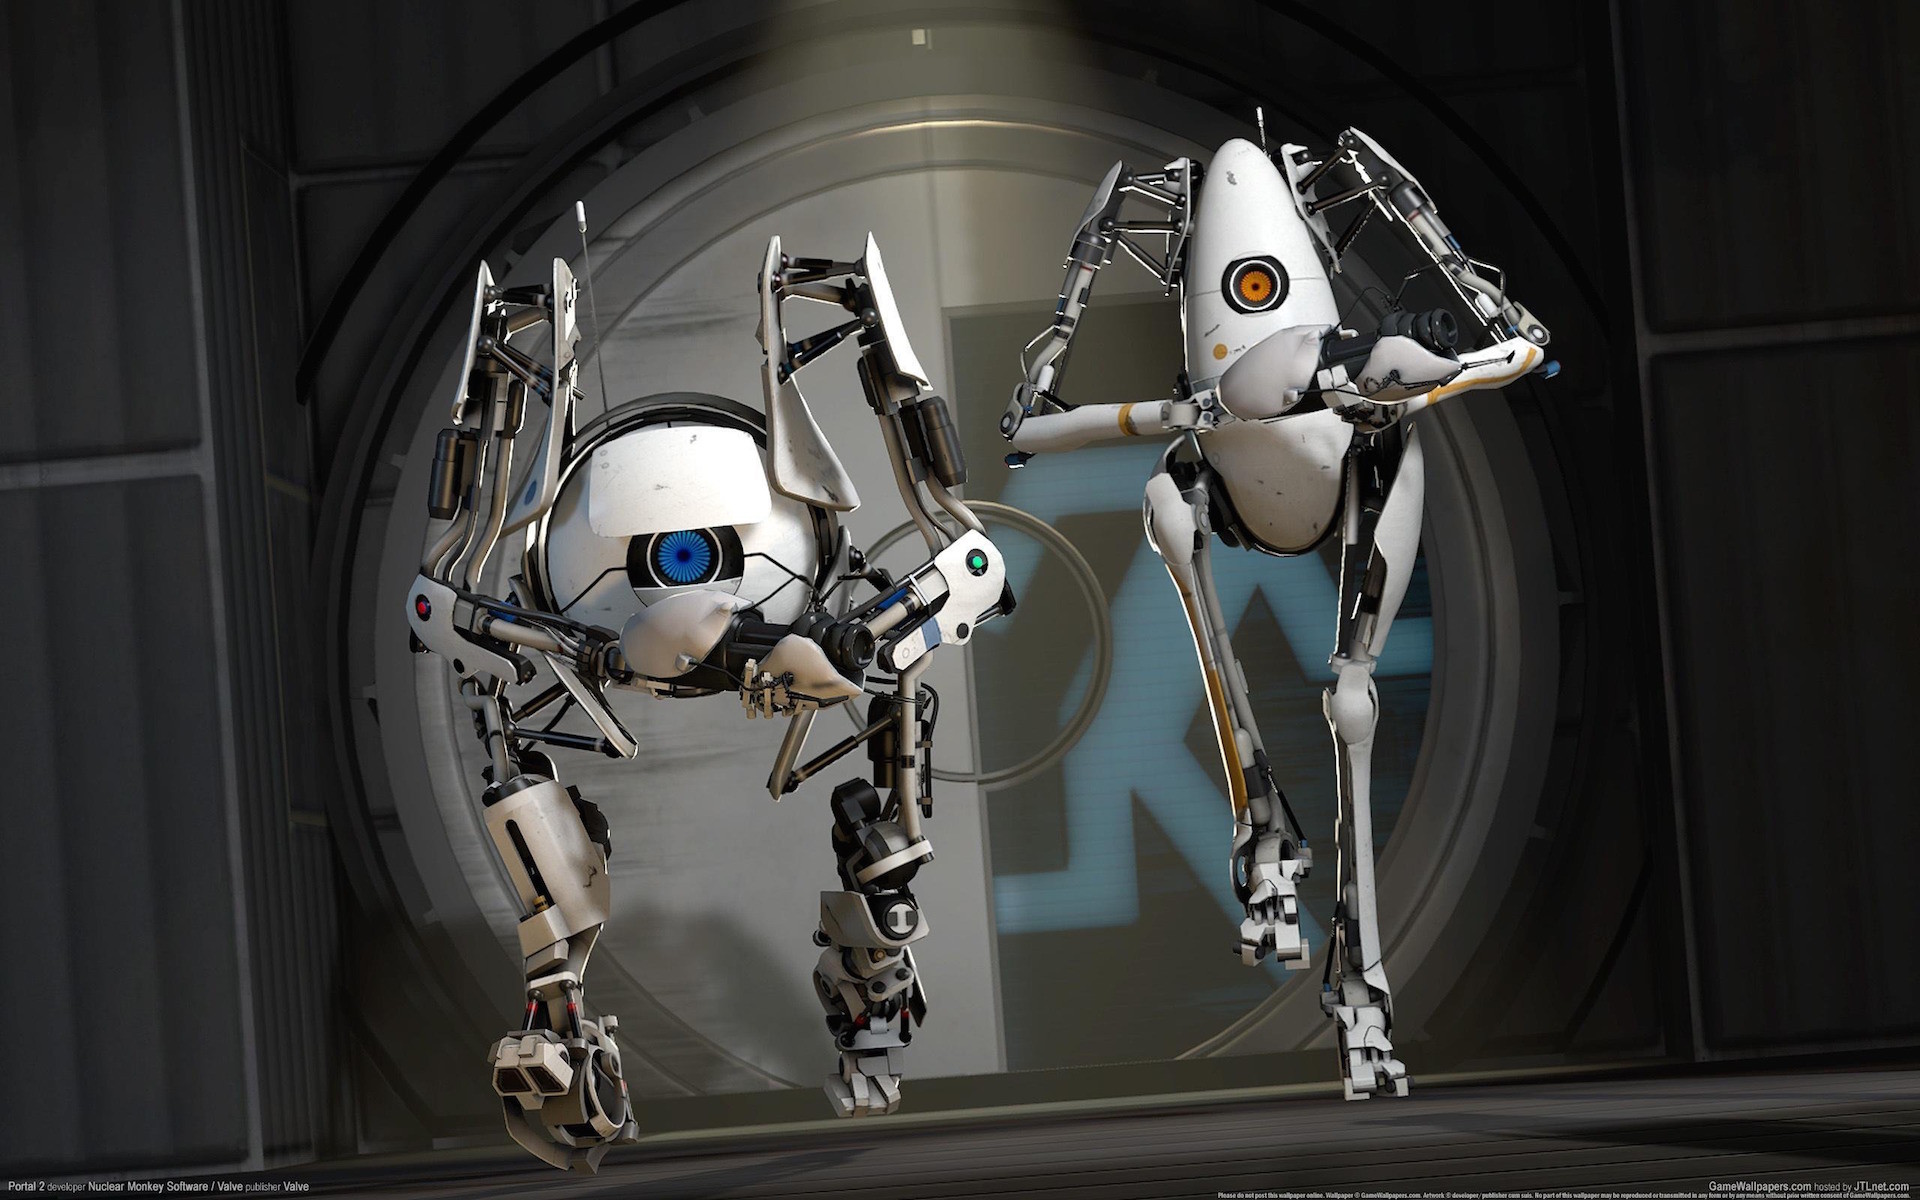 1920x1200 Valve's Aperture Science HTC Vive Demo featured characters from the Portal  universe